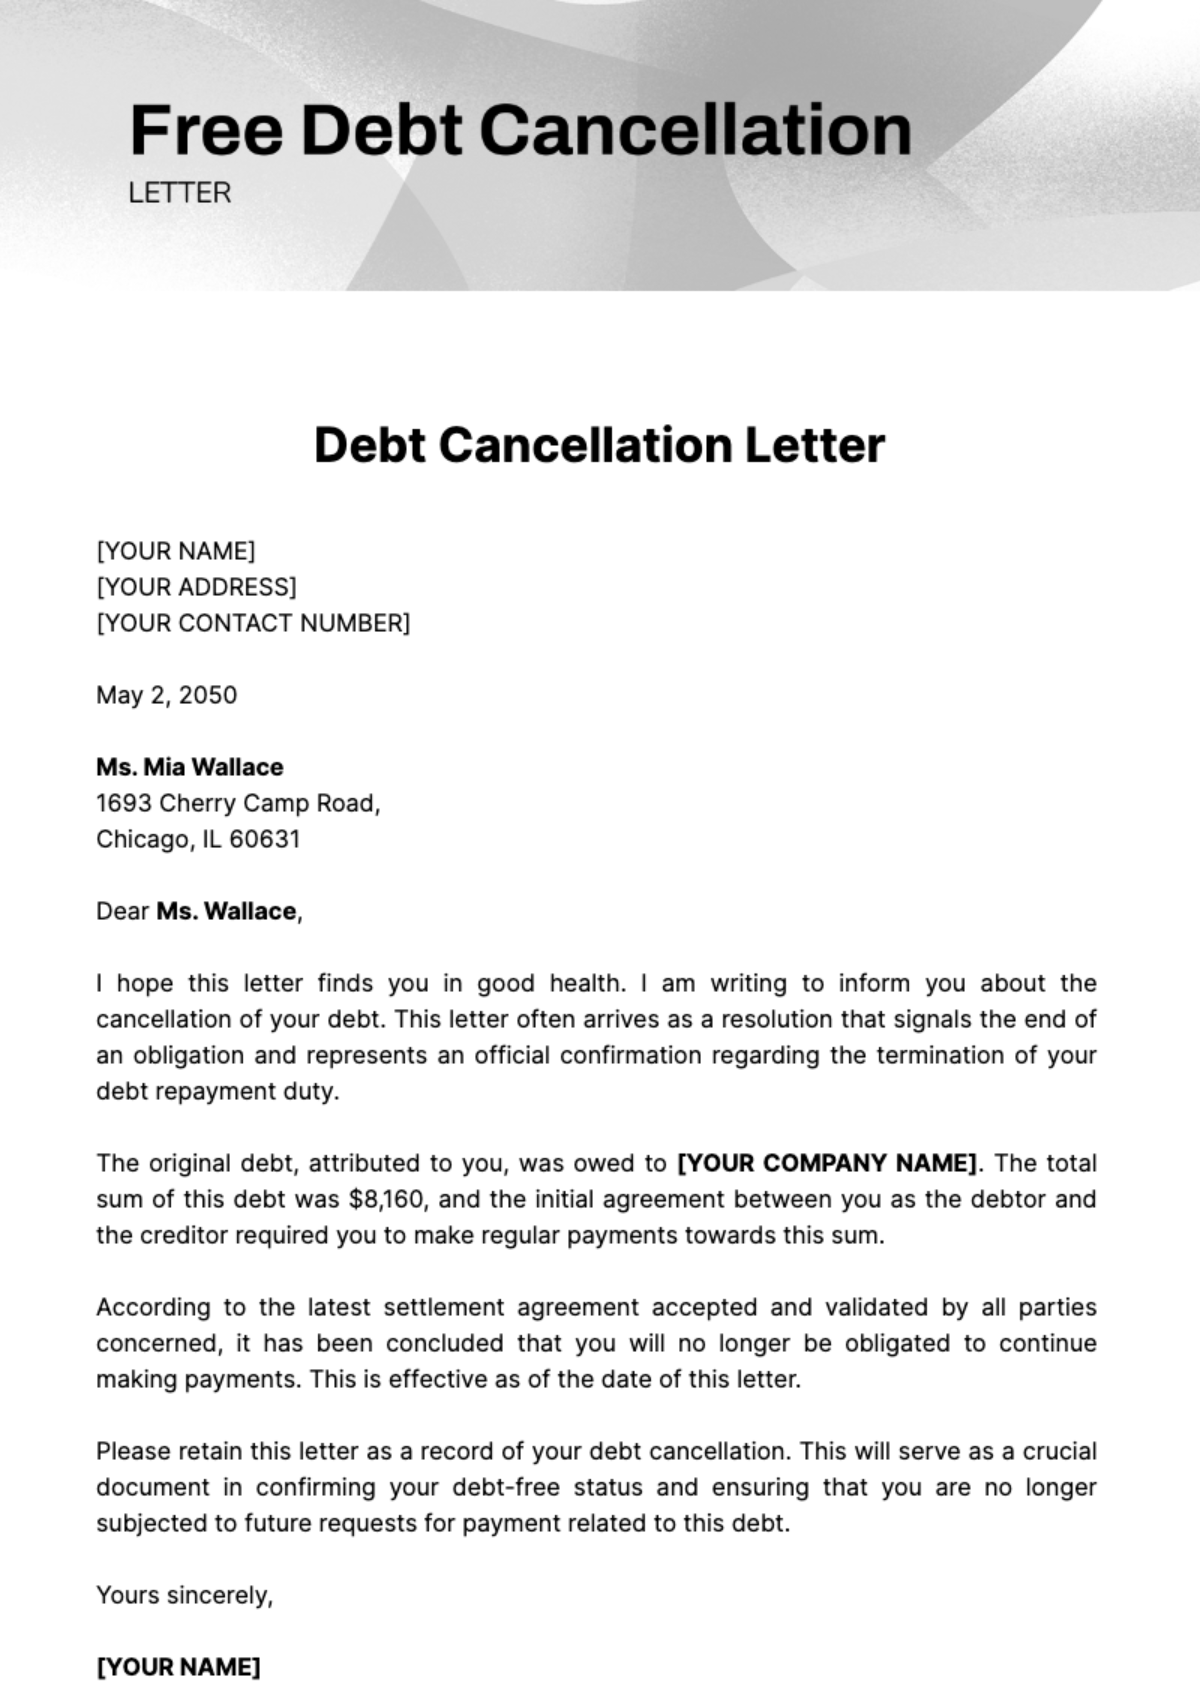 Free Debt Cancellation Letter Template